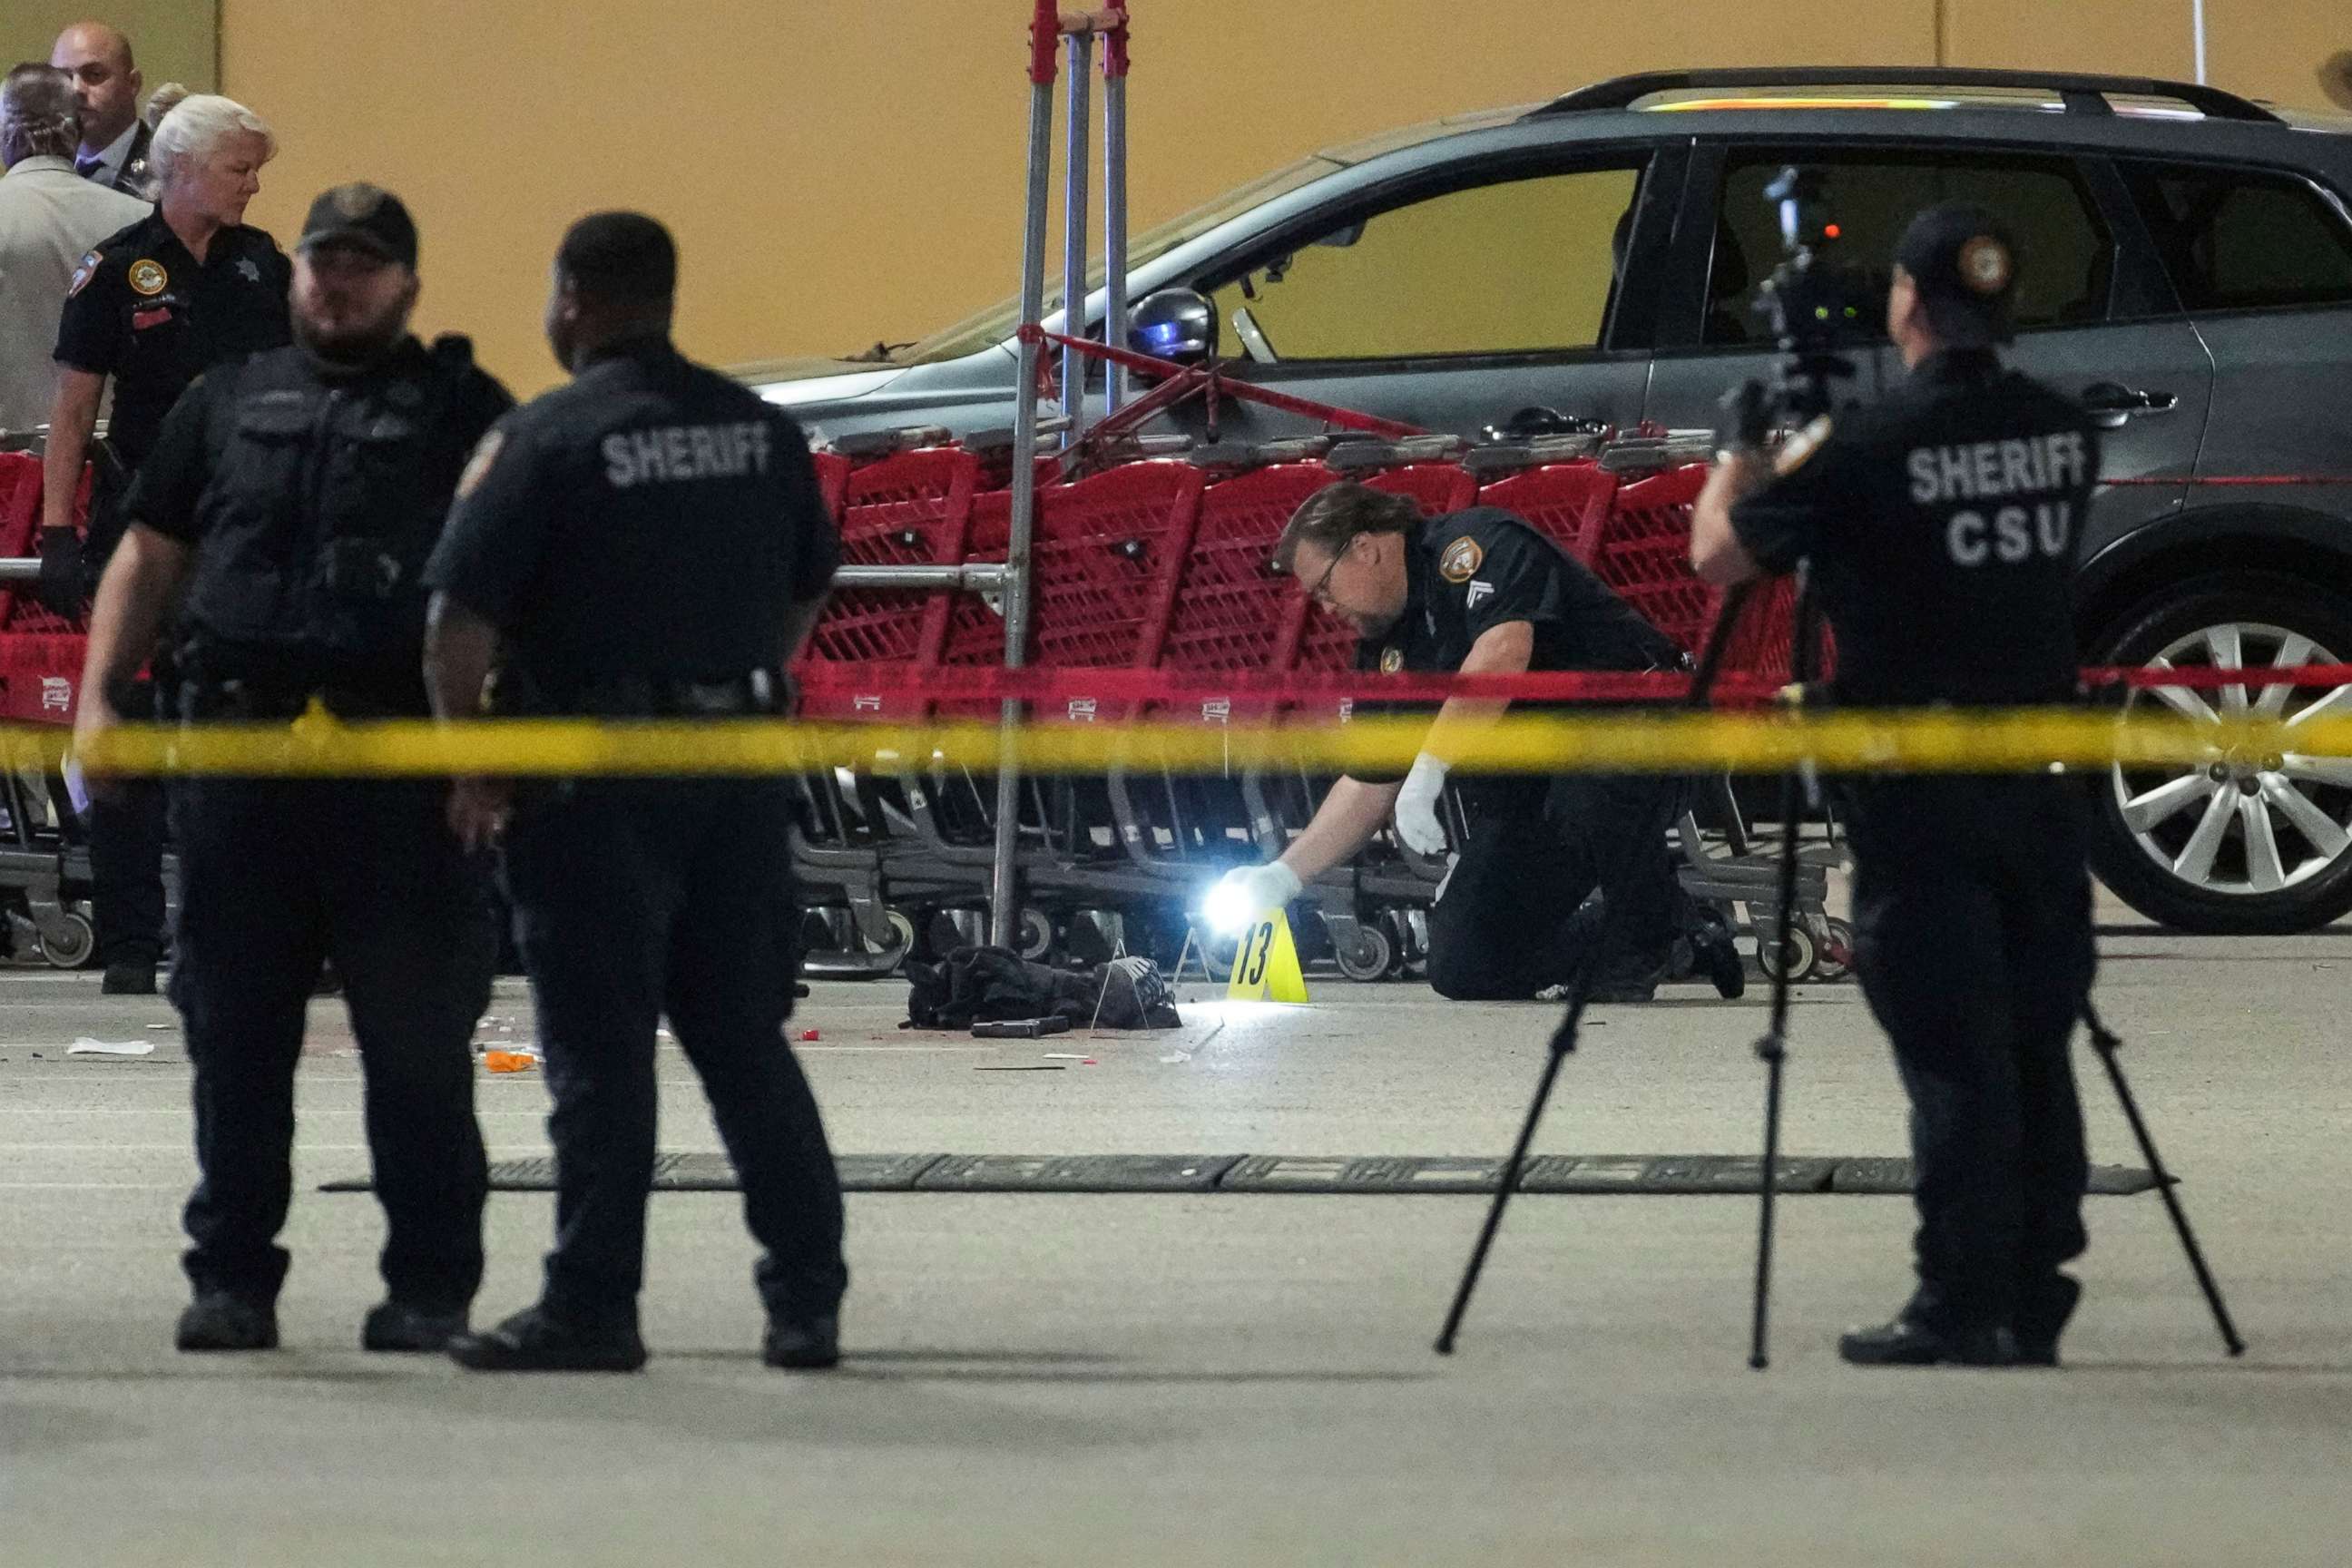 PHOTO: Law enforcement officers investigate the scene of shooting, March 31, 2022 in Houston.